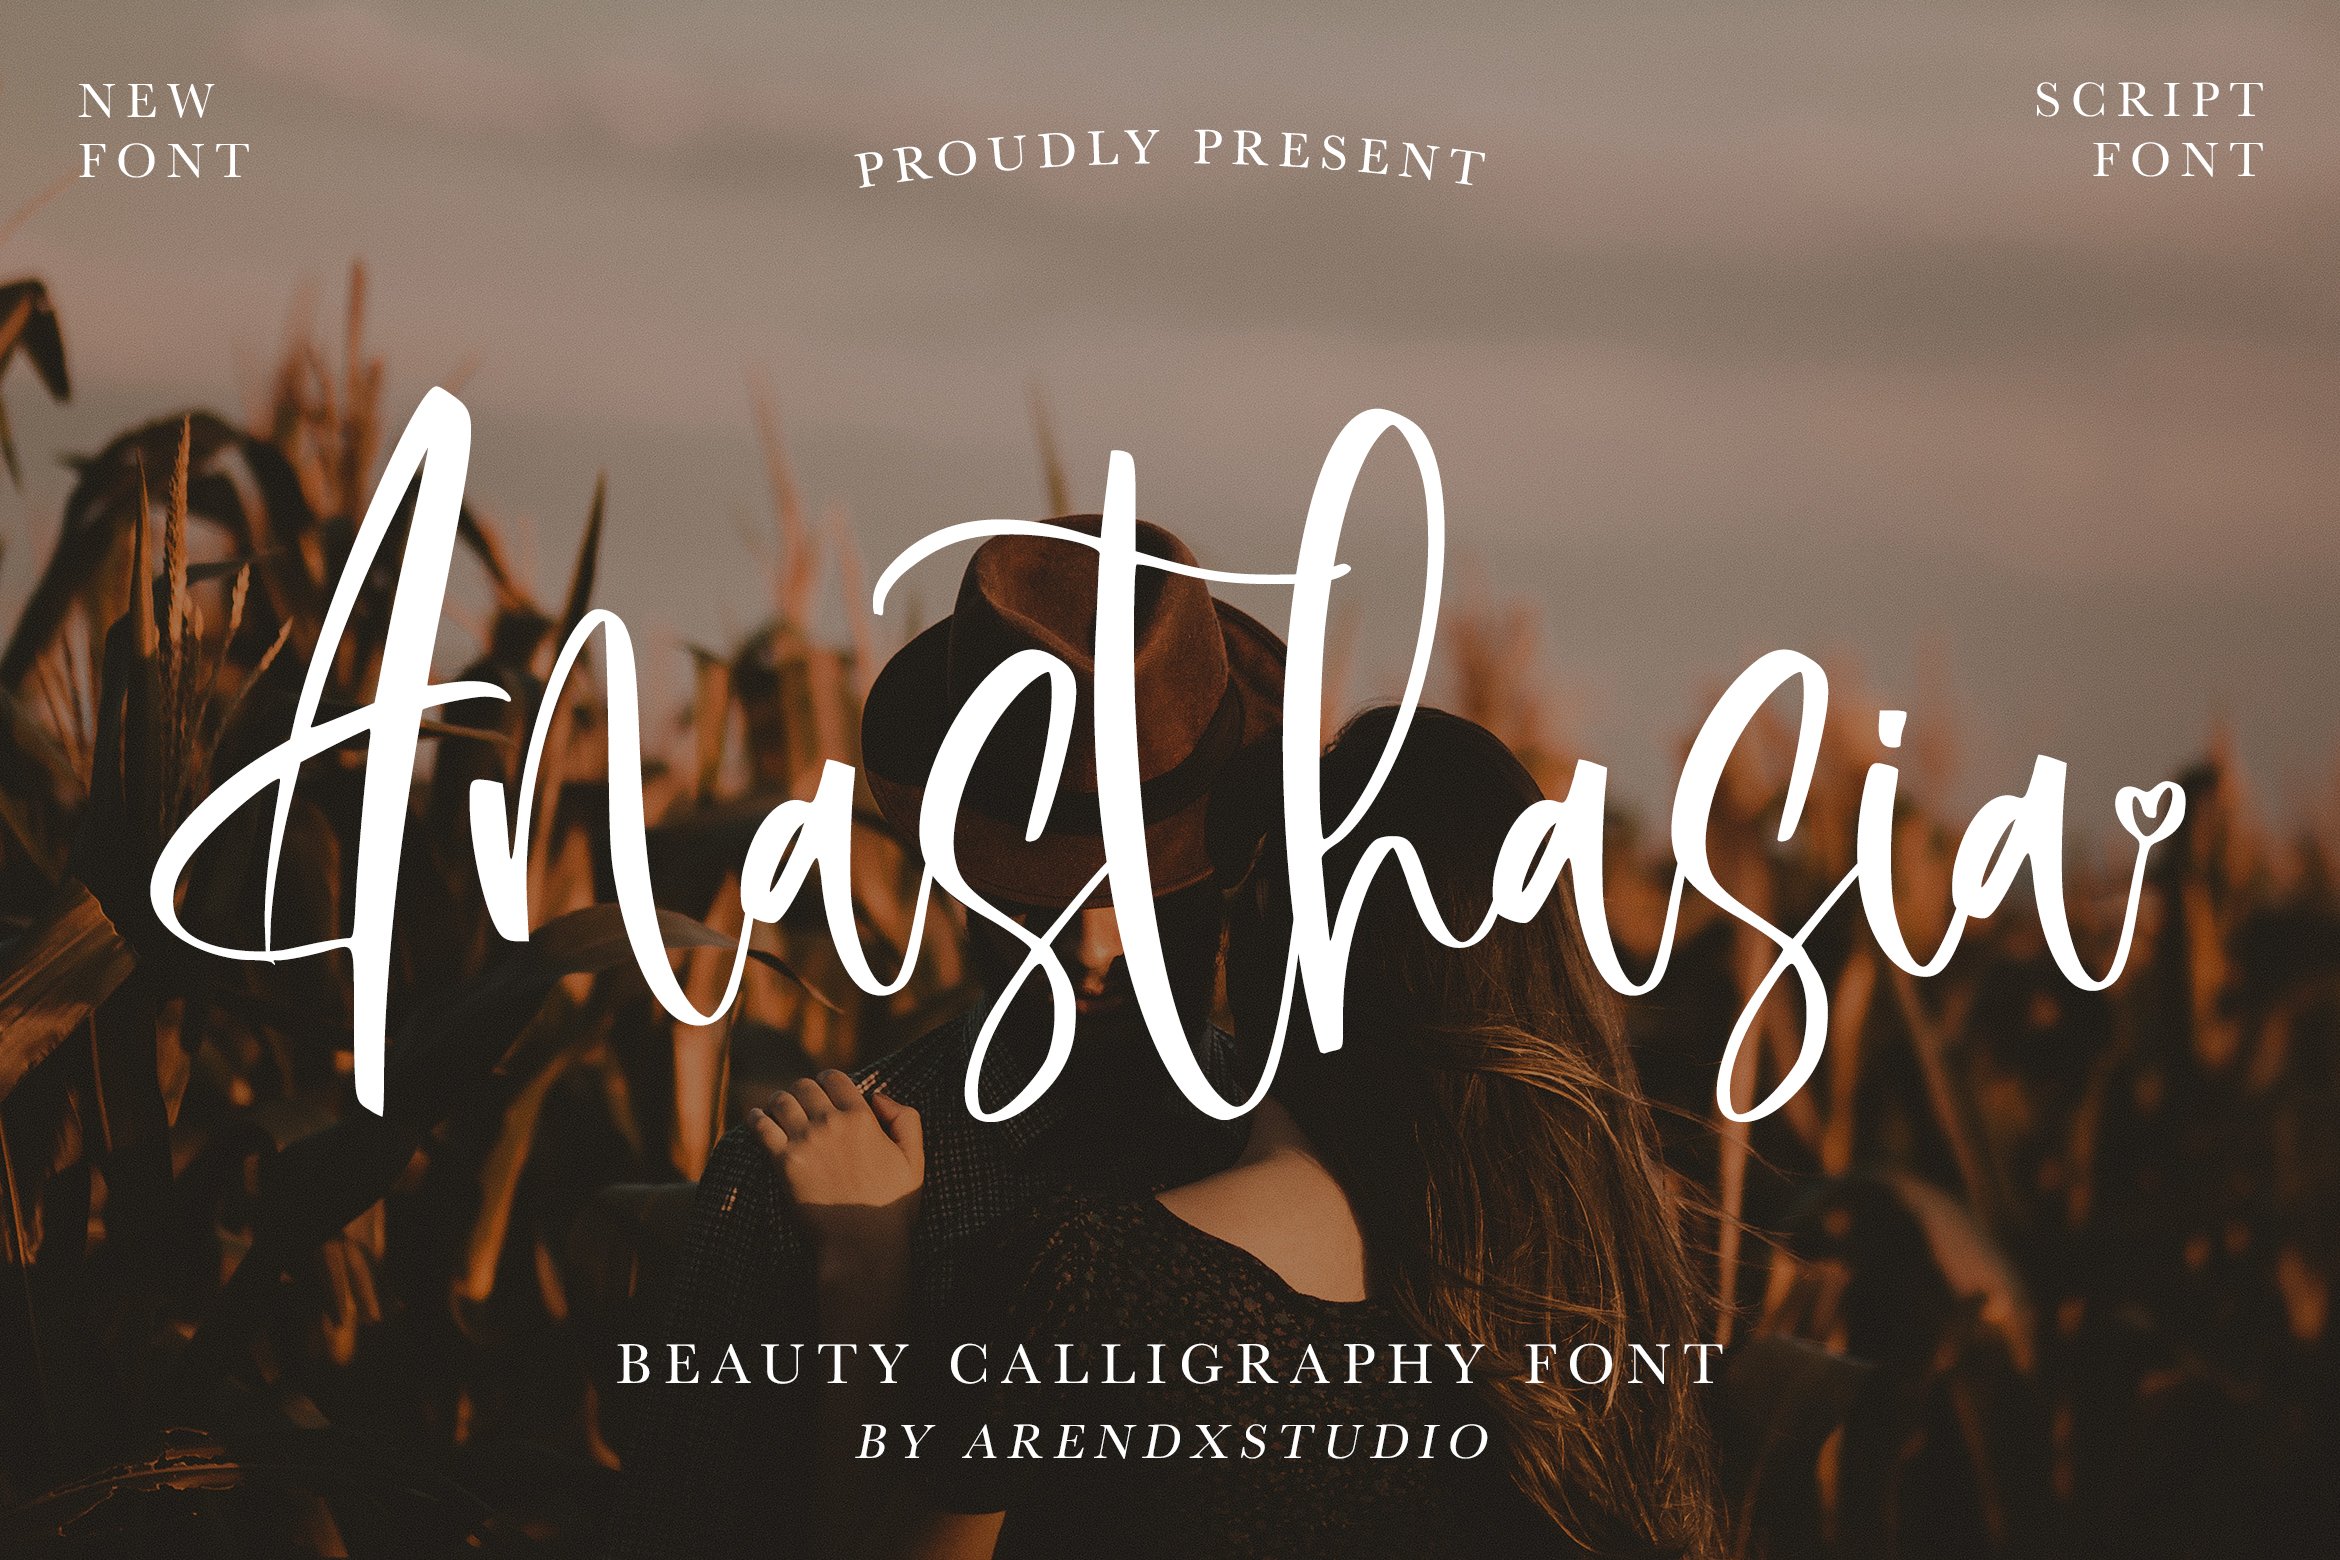 Anasthasia - Beauty Calligraphy Font cover image.